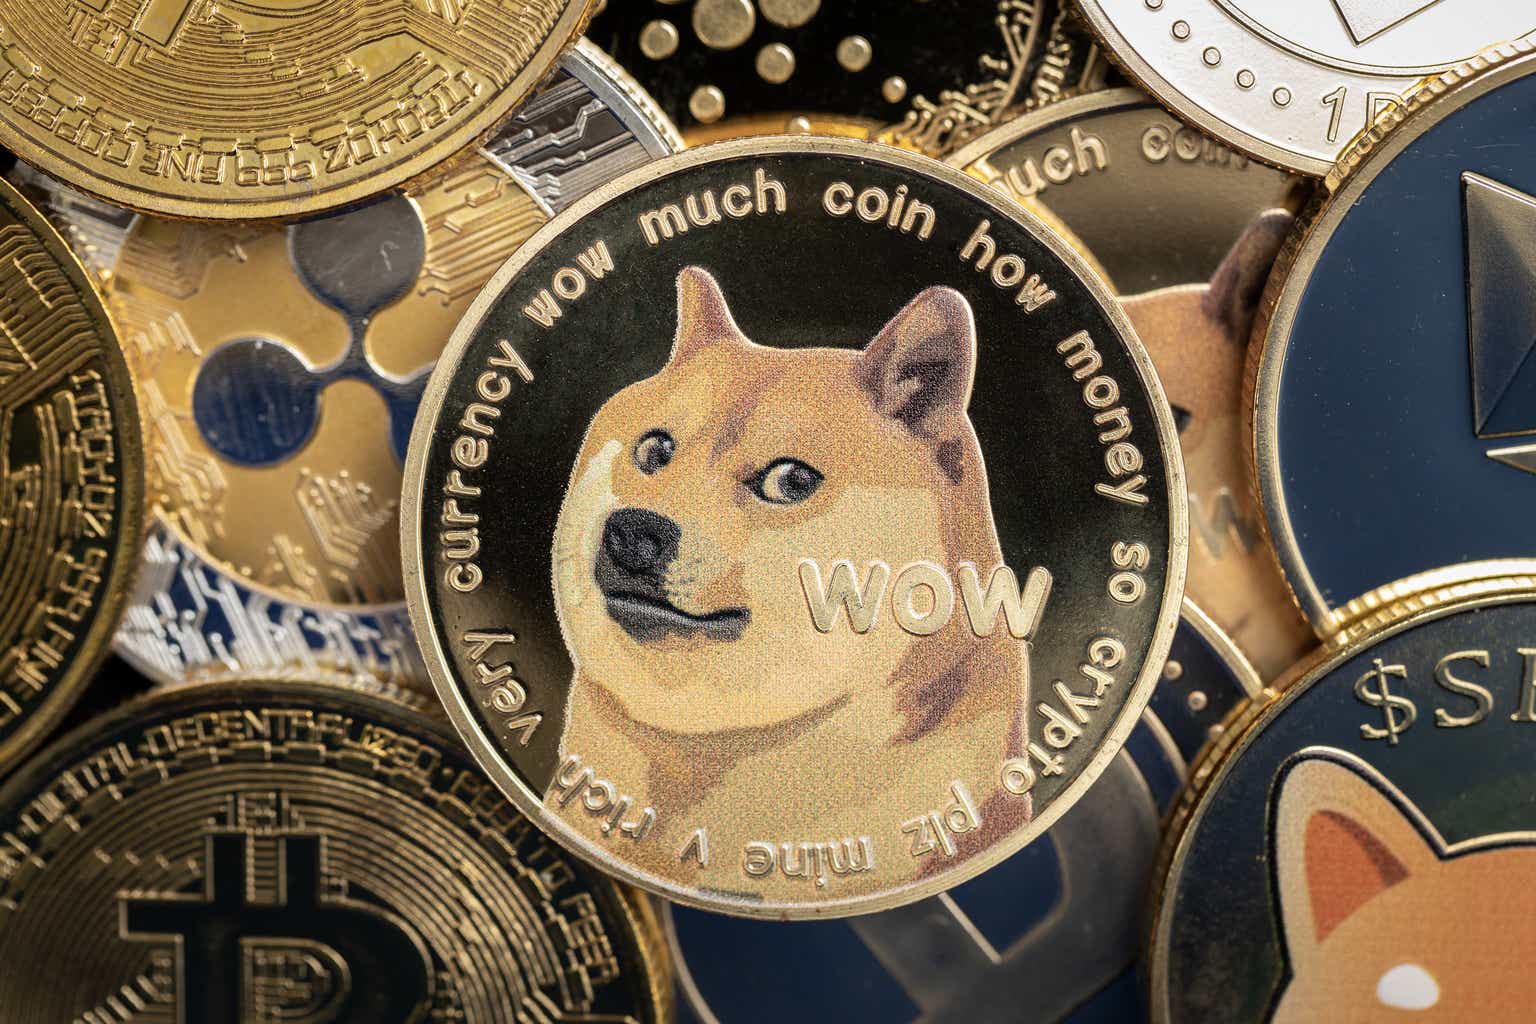 Dogecoin cryptocurrency coin close-up, on top of other cryptocurrency coins